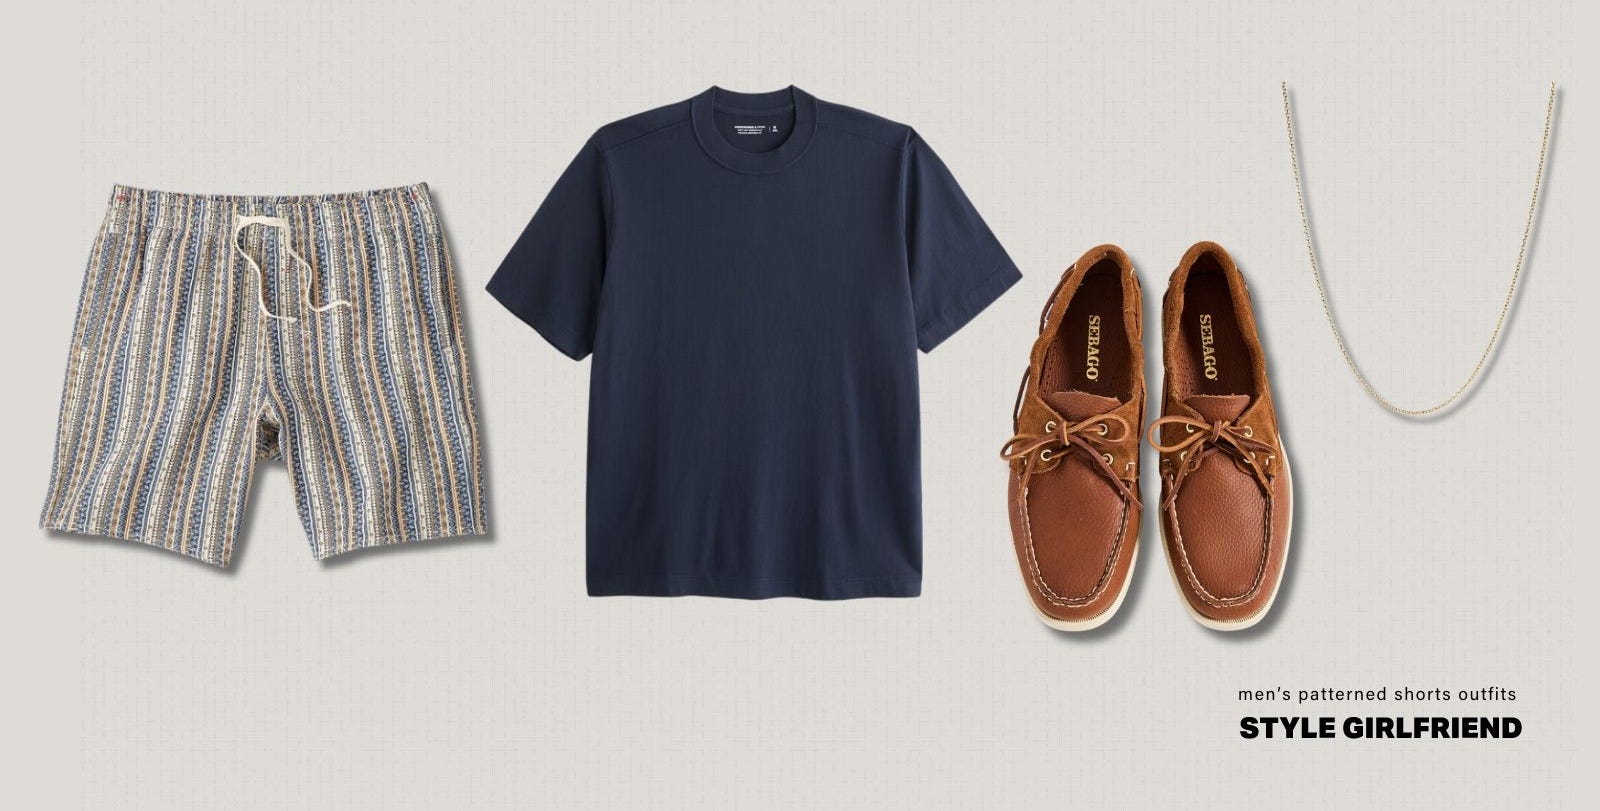 Flat lay men's warm weather clothing including graphic shorts, navy t-shirt, boat shoes and necklace